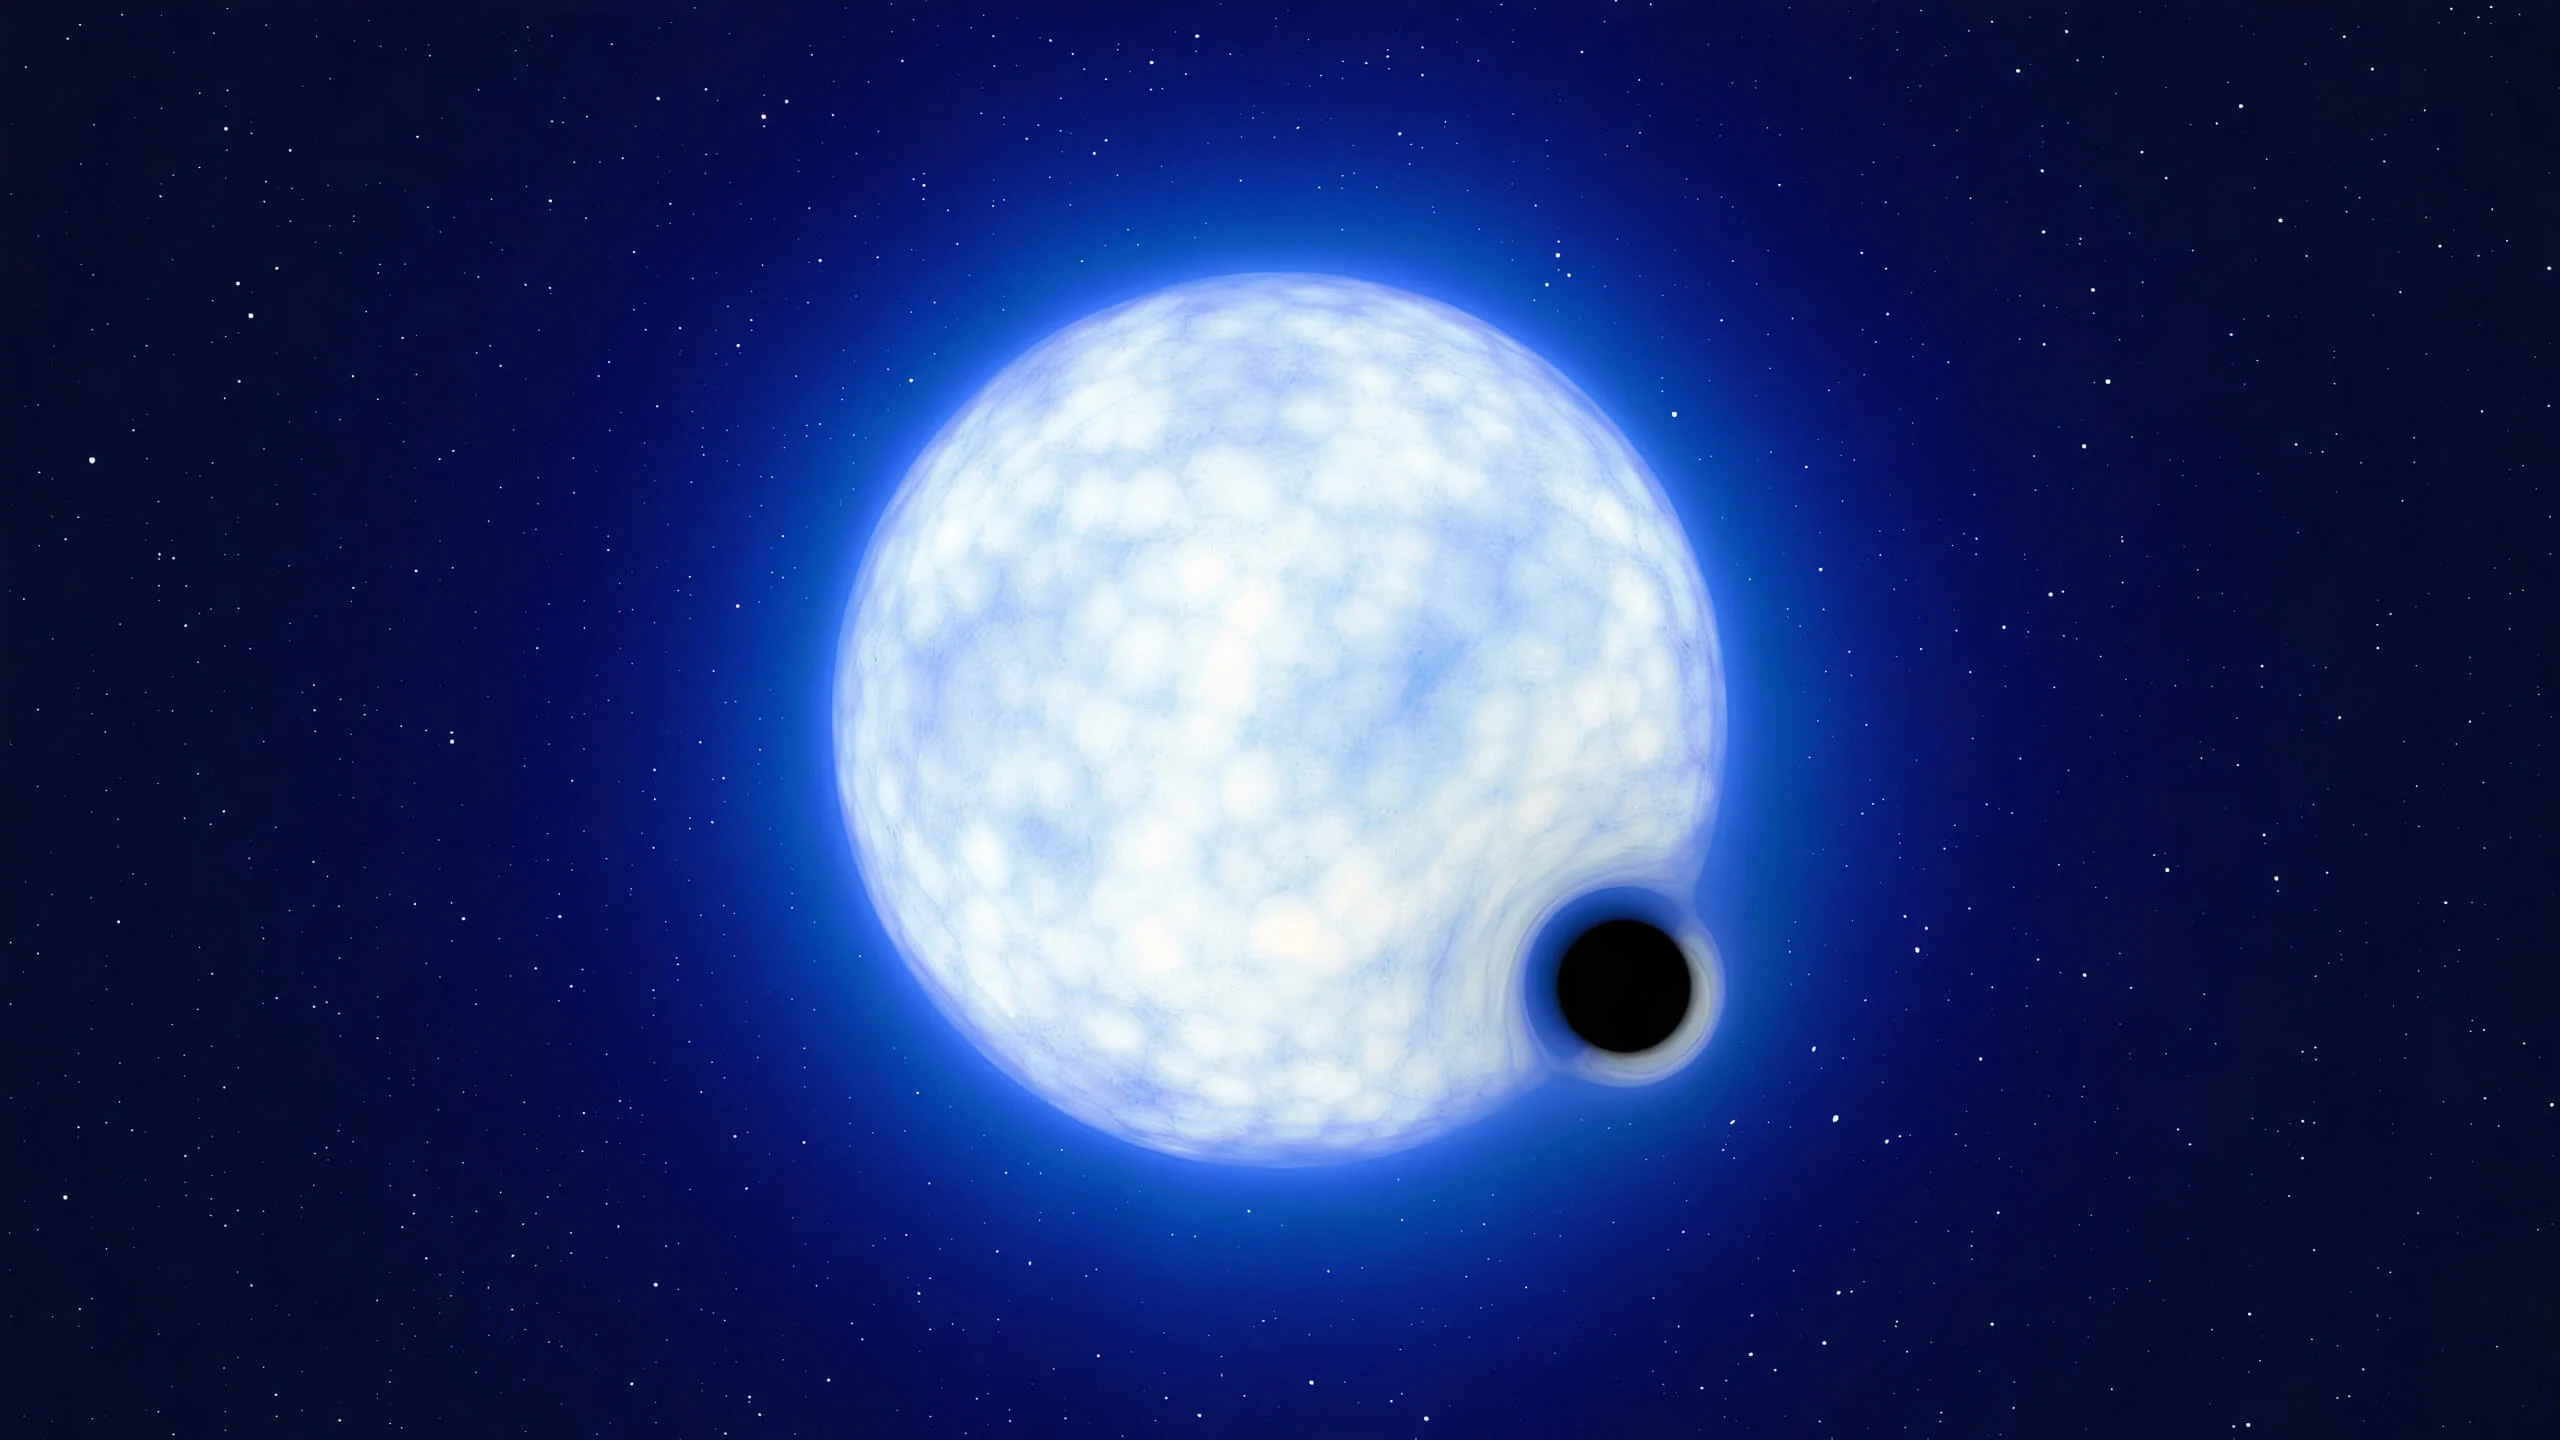 This artist's illustration shows what this binary system VFTS 243 probably looks like, with a small black hole companion orbiting around a giant bright blue star. Credit: ESO/L. Calçada